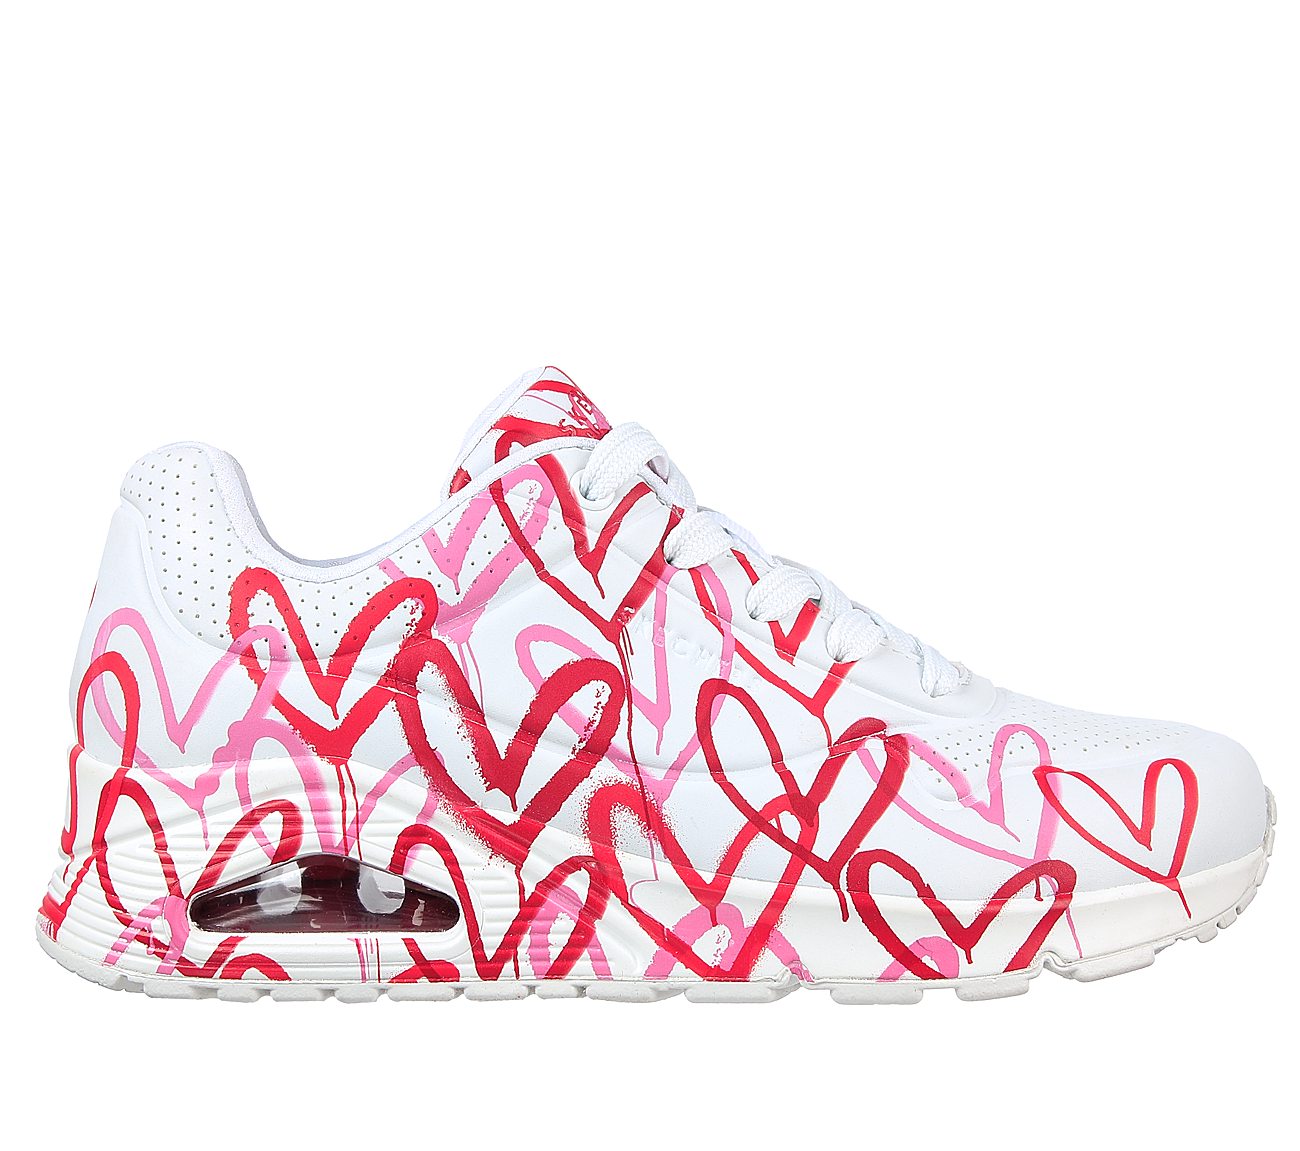 UNO - SPREAD THE LOVE, WHITE/RED/PINK Footwear Lateral View